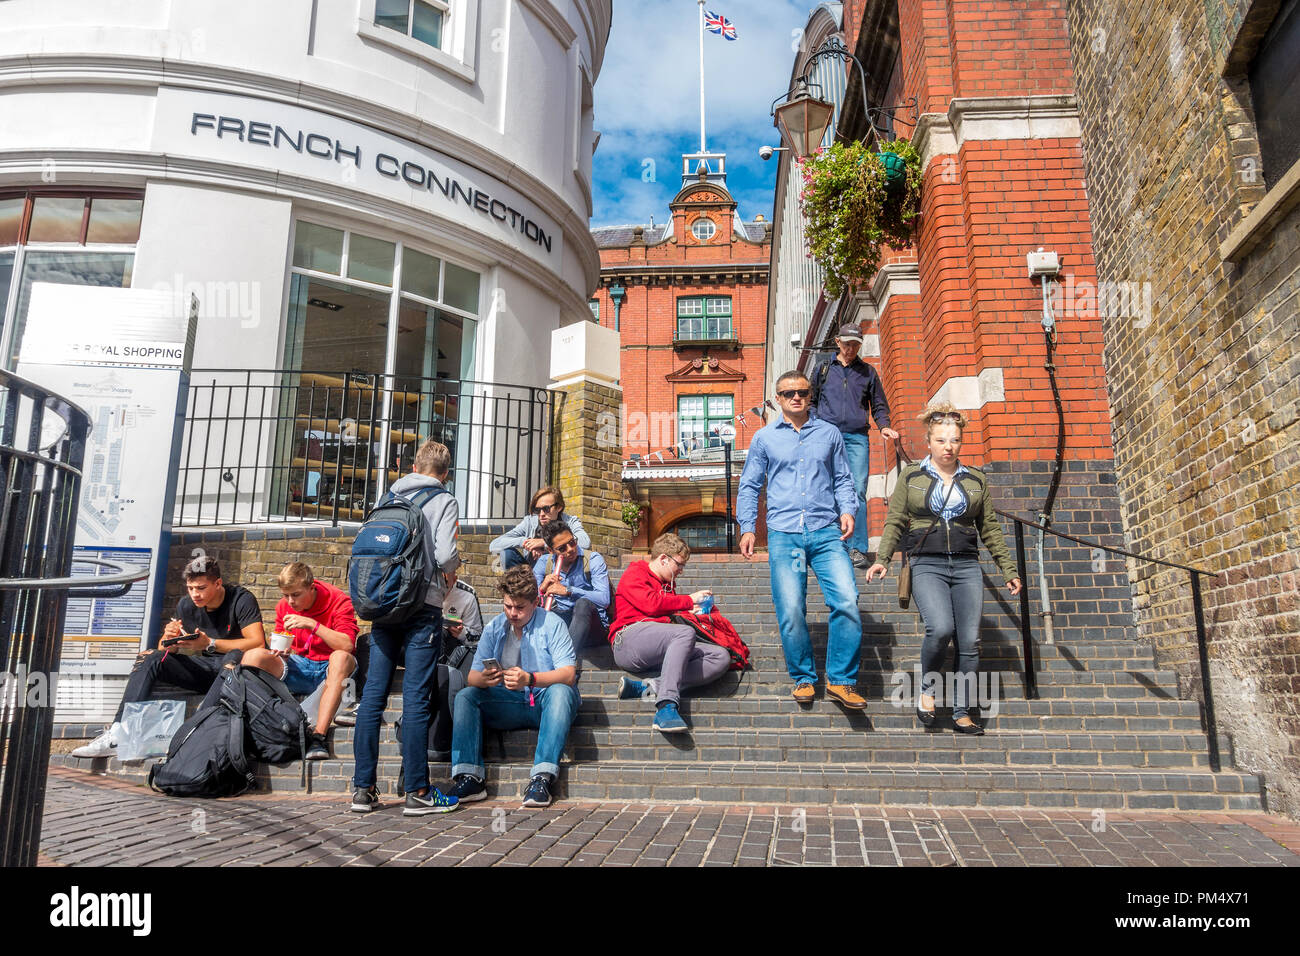 A group of young men sit on steps outside the French Connection store in Windsor, UK. Stock Photo